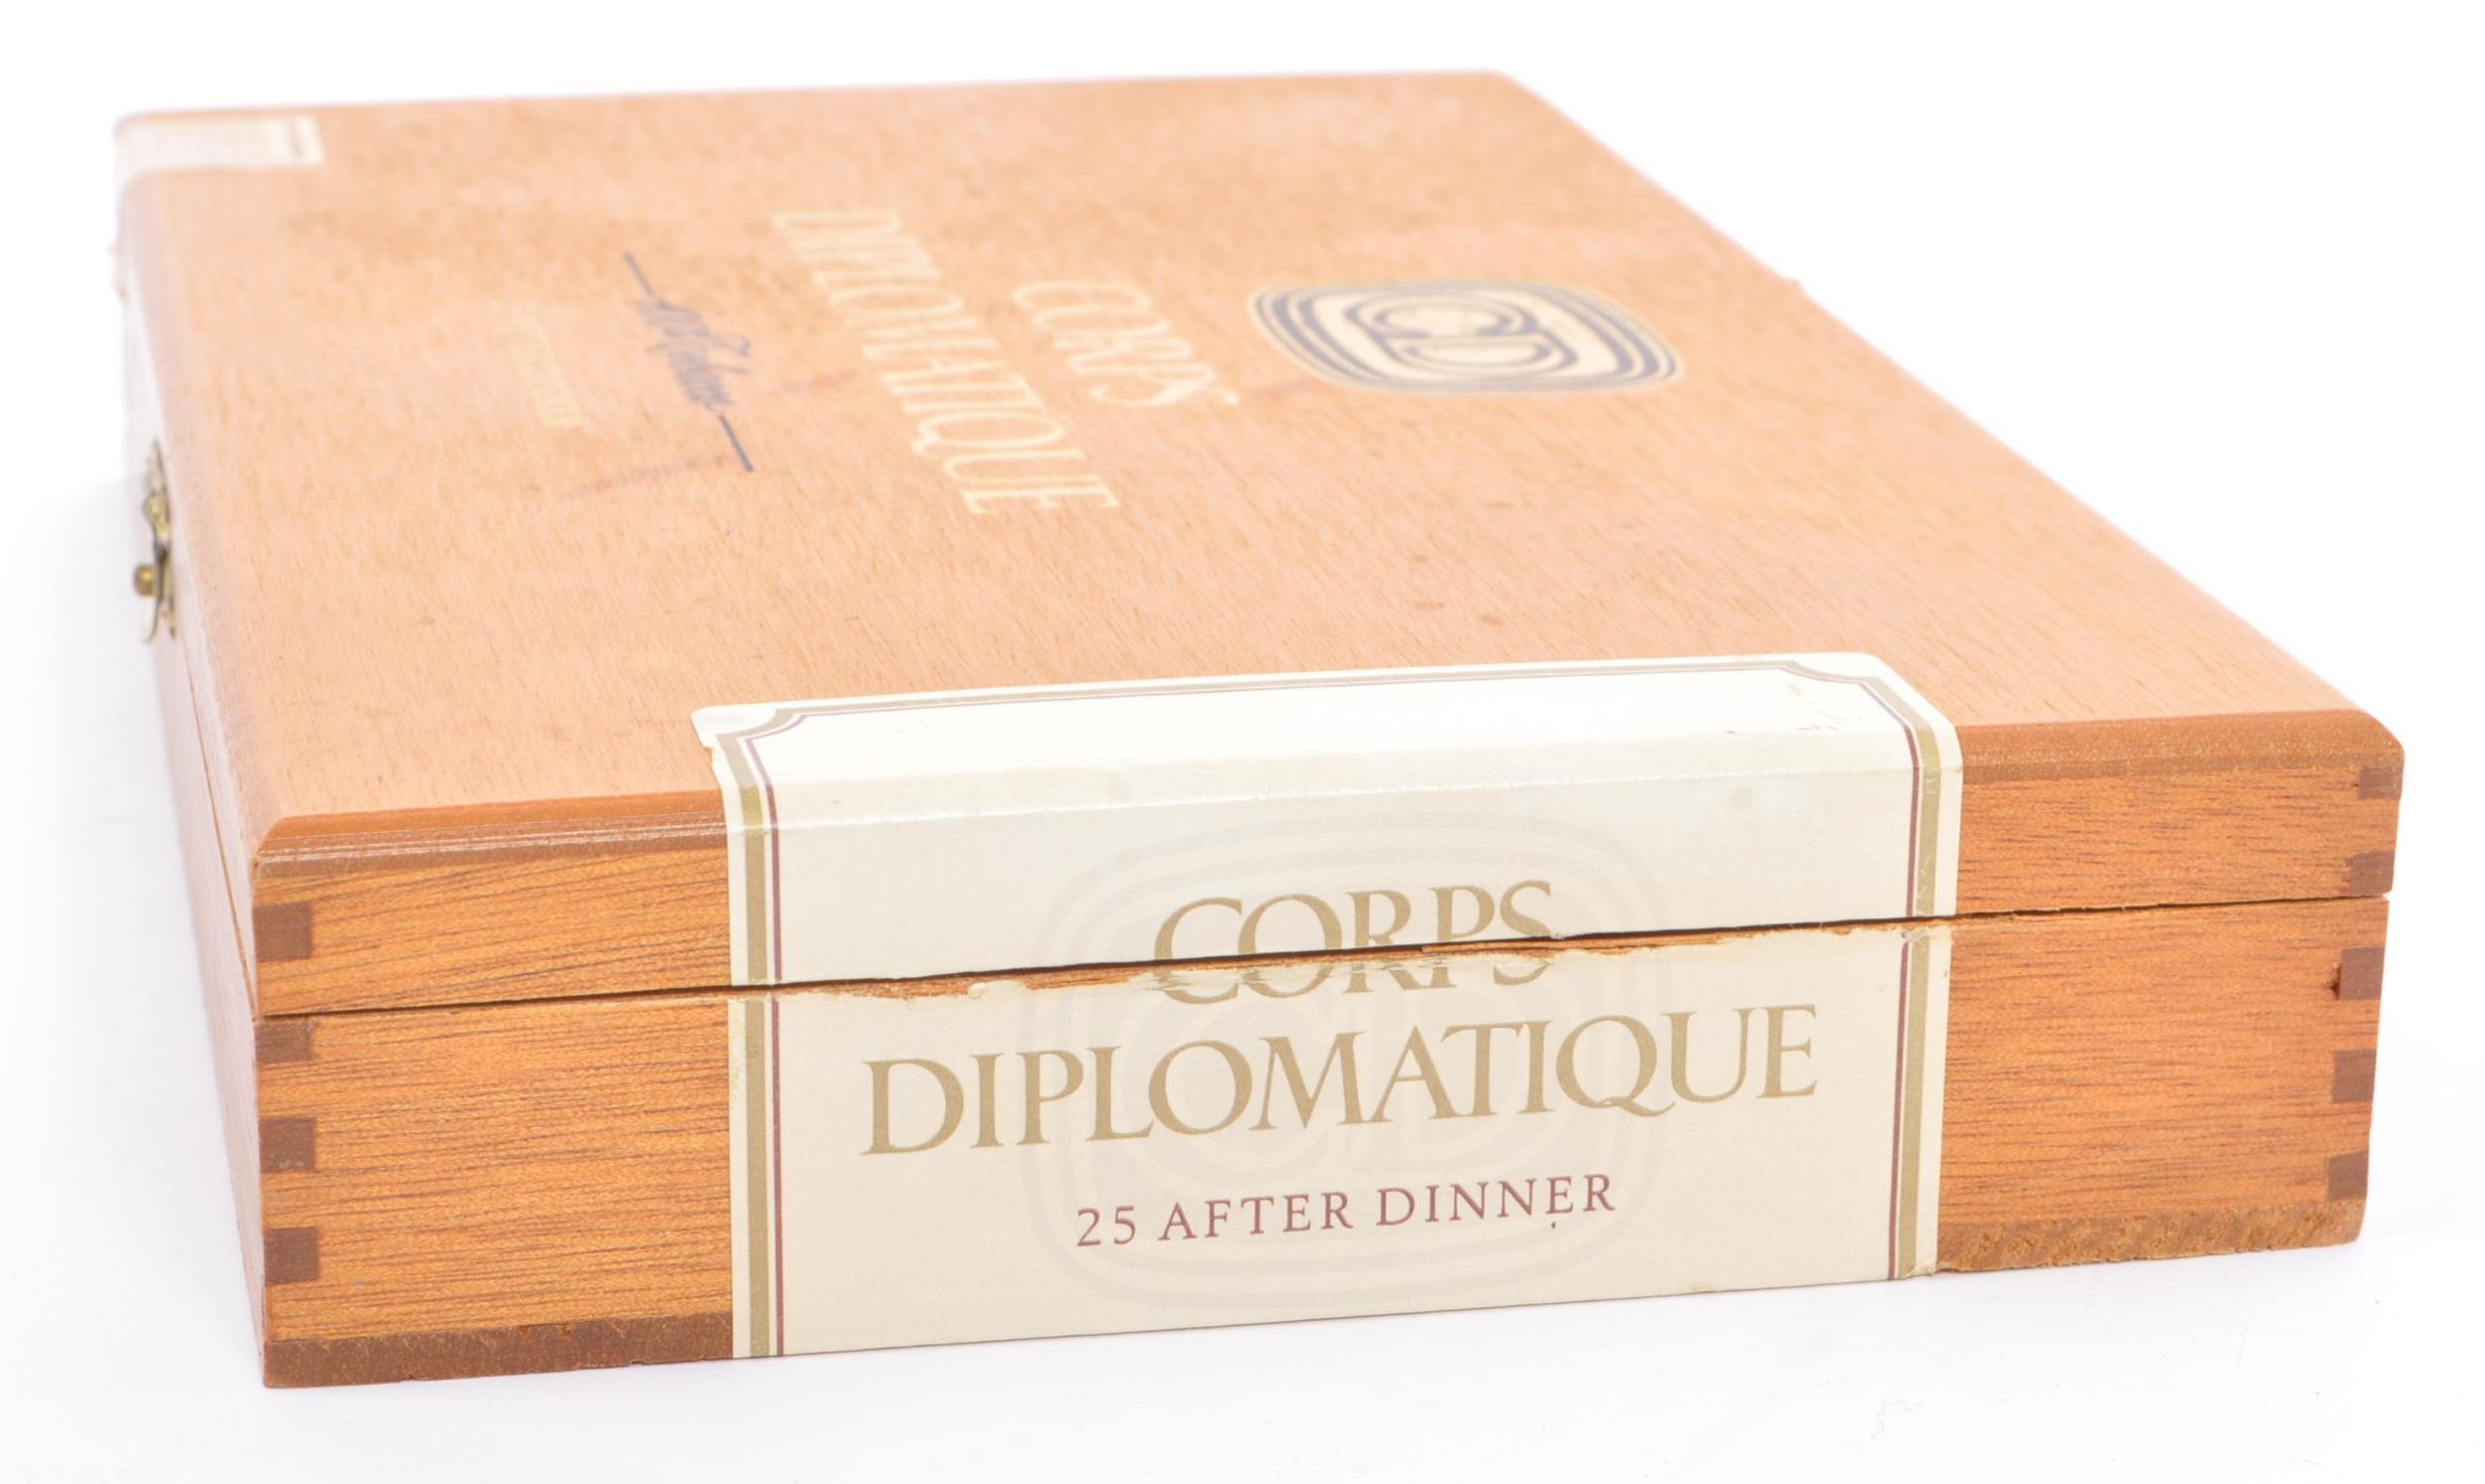 BOXED COLLECTION OF 'CORPS DIPLOMATIQUE' AFTER DINNER CIGARS - Image 6 of 6